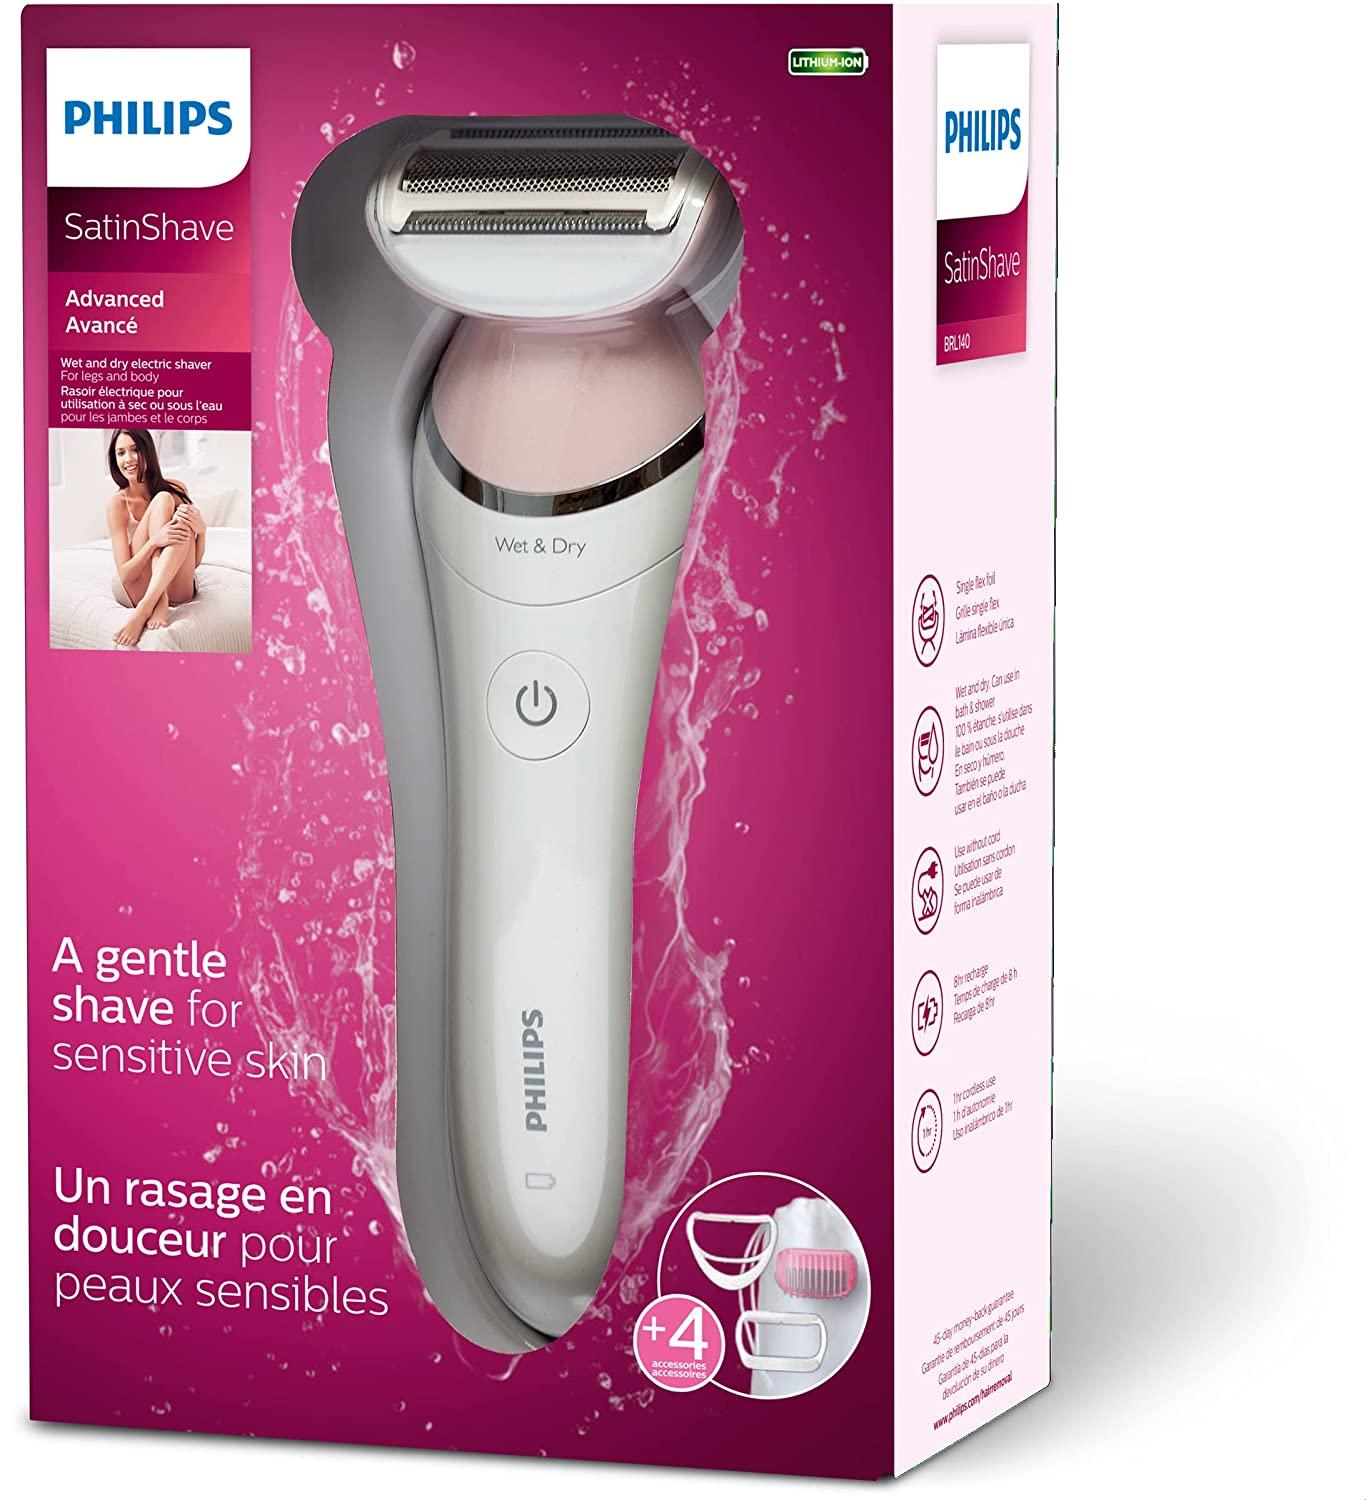 Philips SatinShave Advanced Womens Electric Shaver, Cordless Hair Removal,  BRL140/51 Old Version Shaver + 4 Accessories